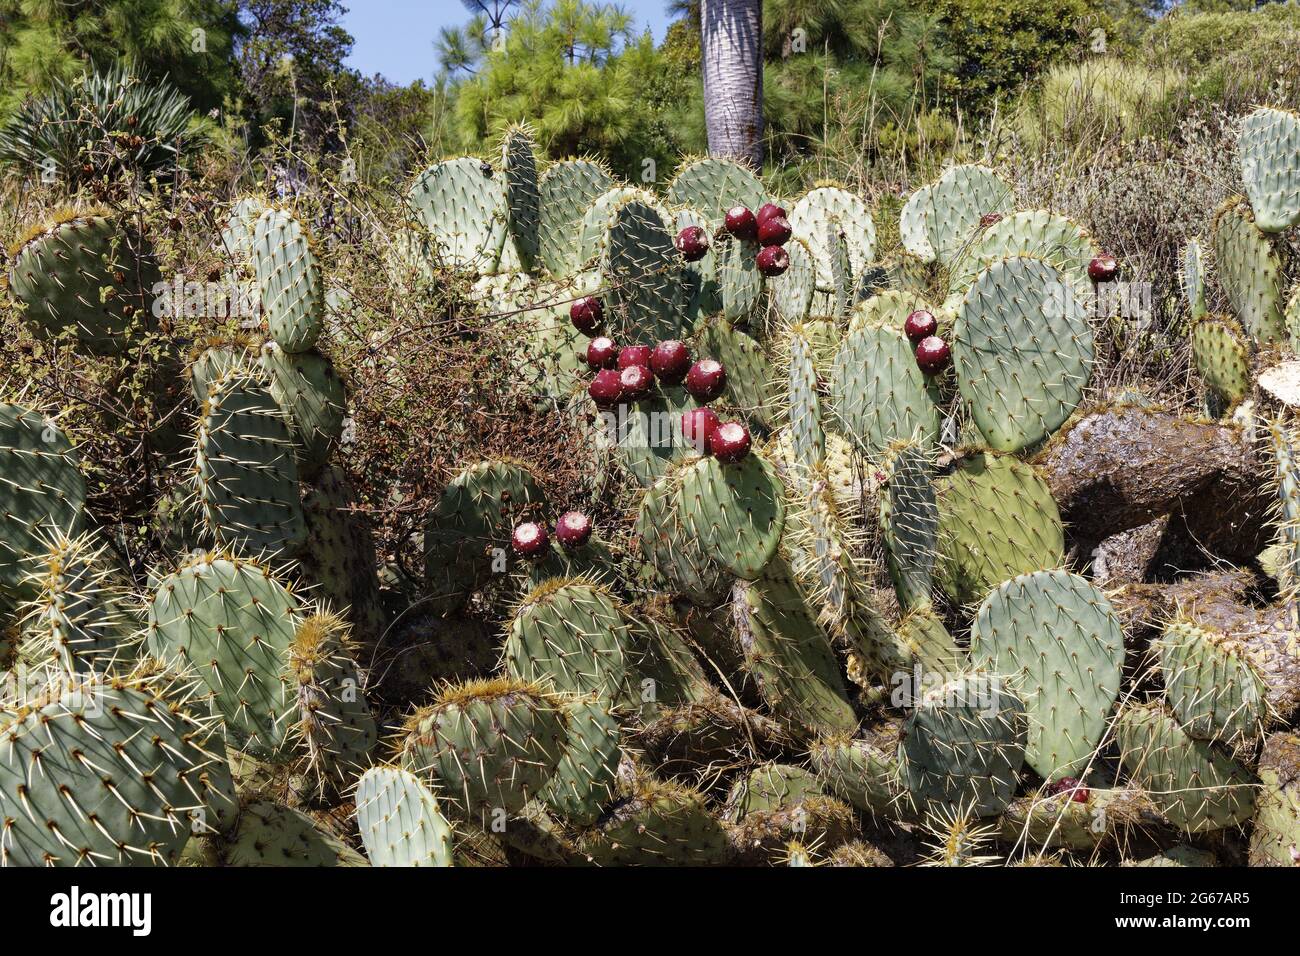 Le Rayol-Canadel, France. 16th Sept, 2020. Prickly pears on September 16, 2020 in Le Rayol-Canadel, France. Stock Photo